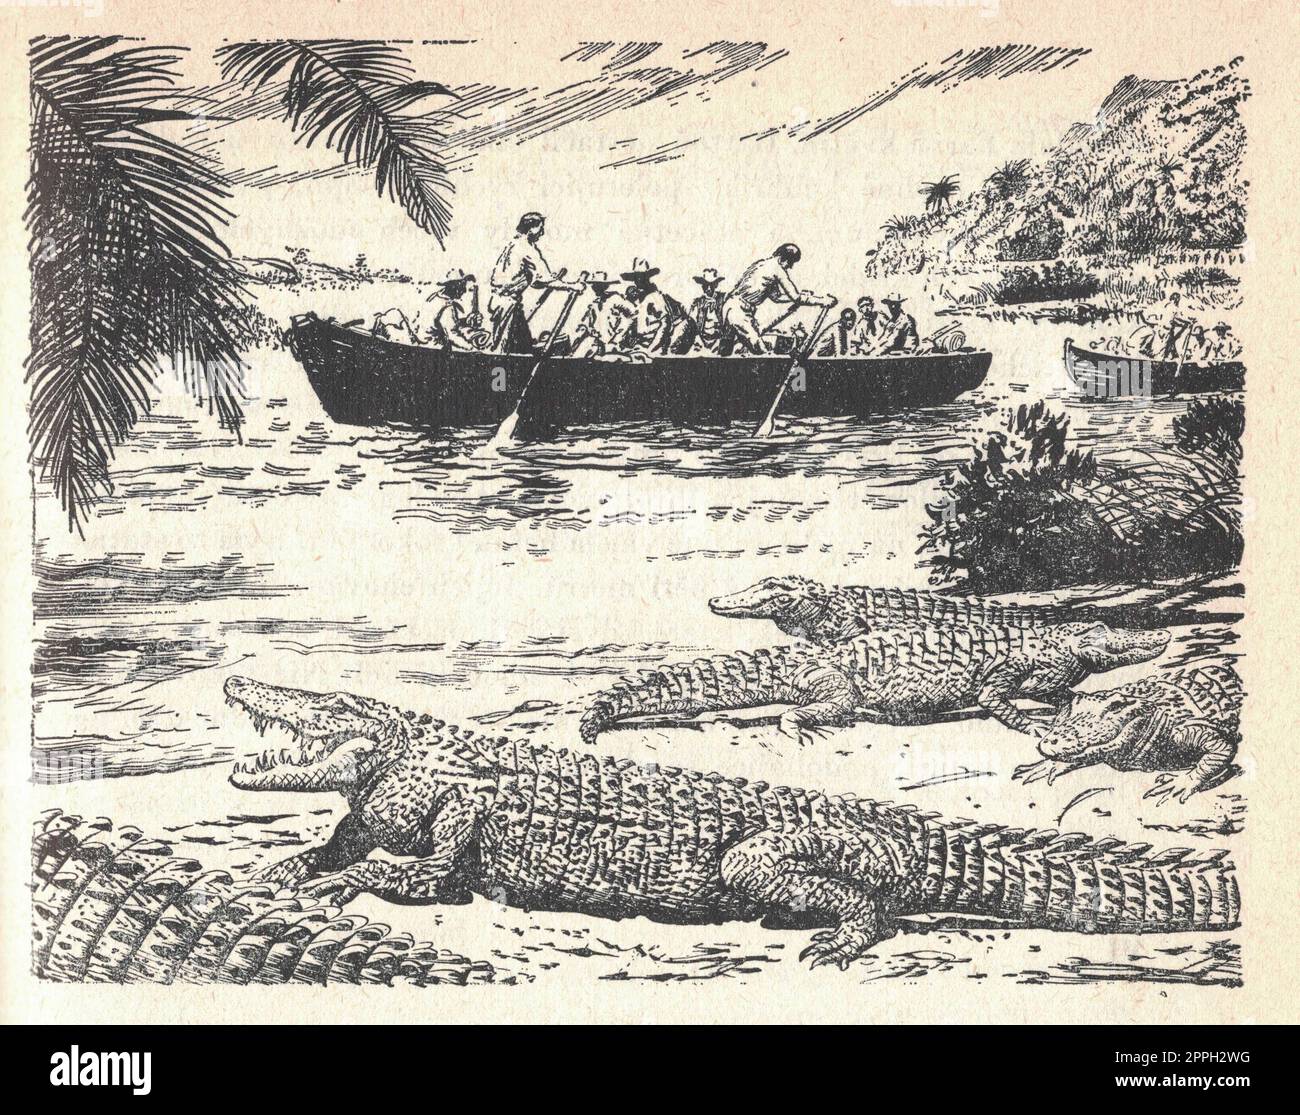 The boat sails on the river. Crocodiles on the seashore. Old black and white illustration. Vintage drawing. Illustration by Zdenek Burian. Stock Photo